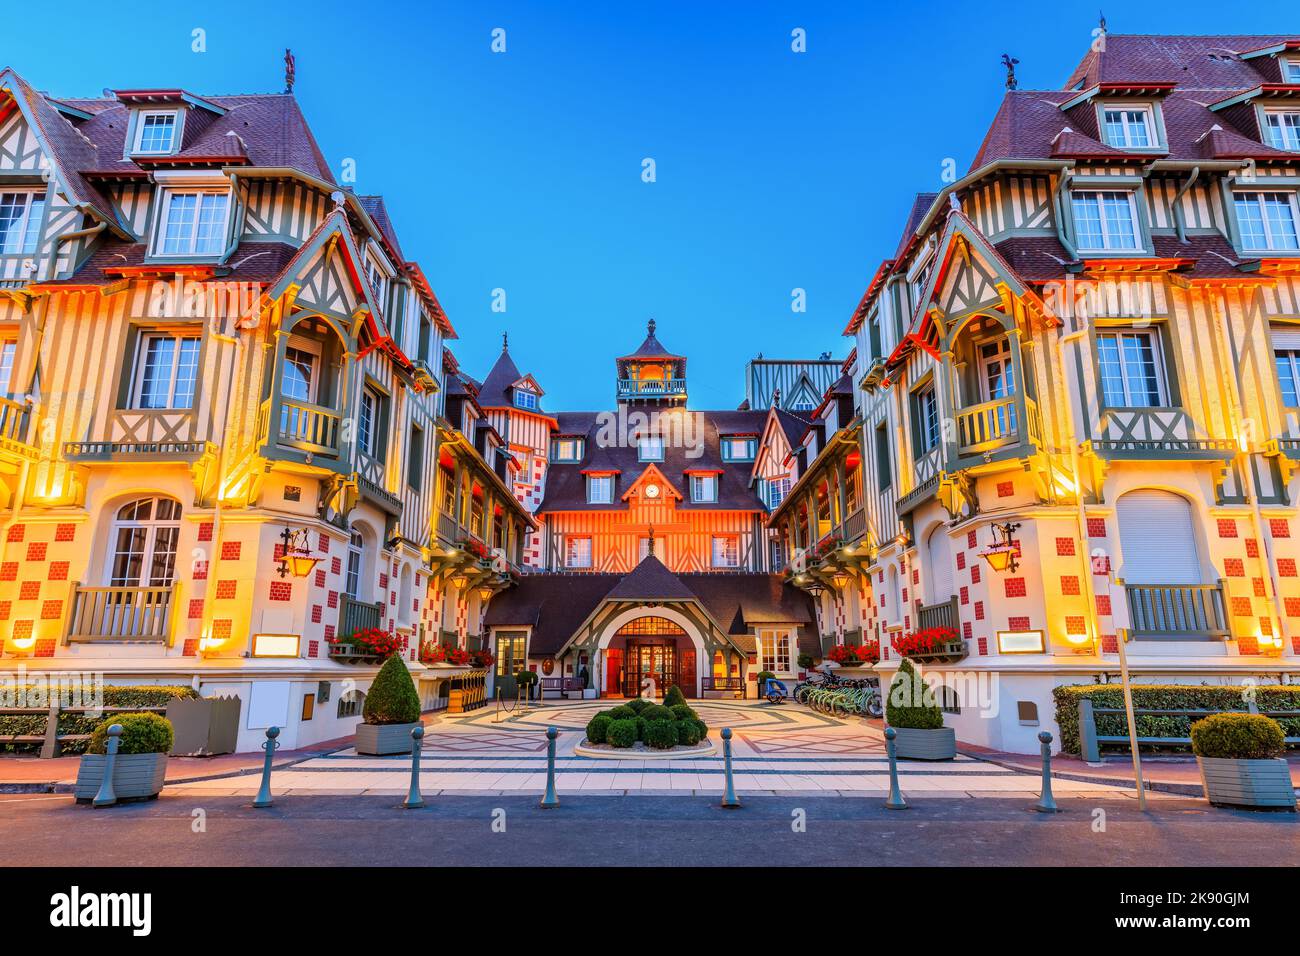 Deauville seaside resort architecture. Normandy, France. Stock Photo